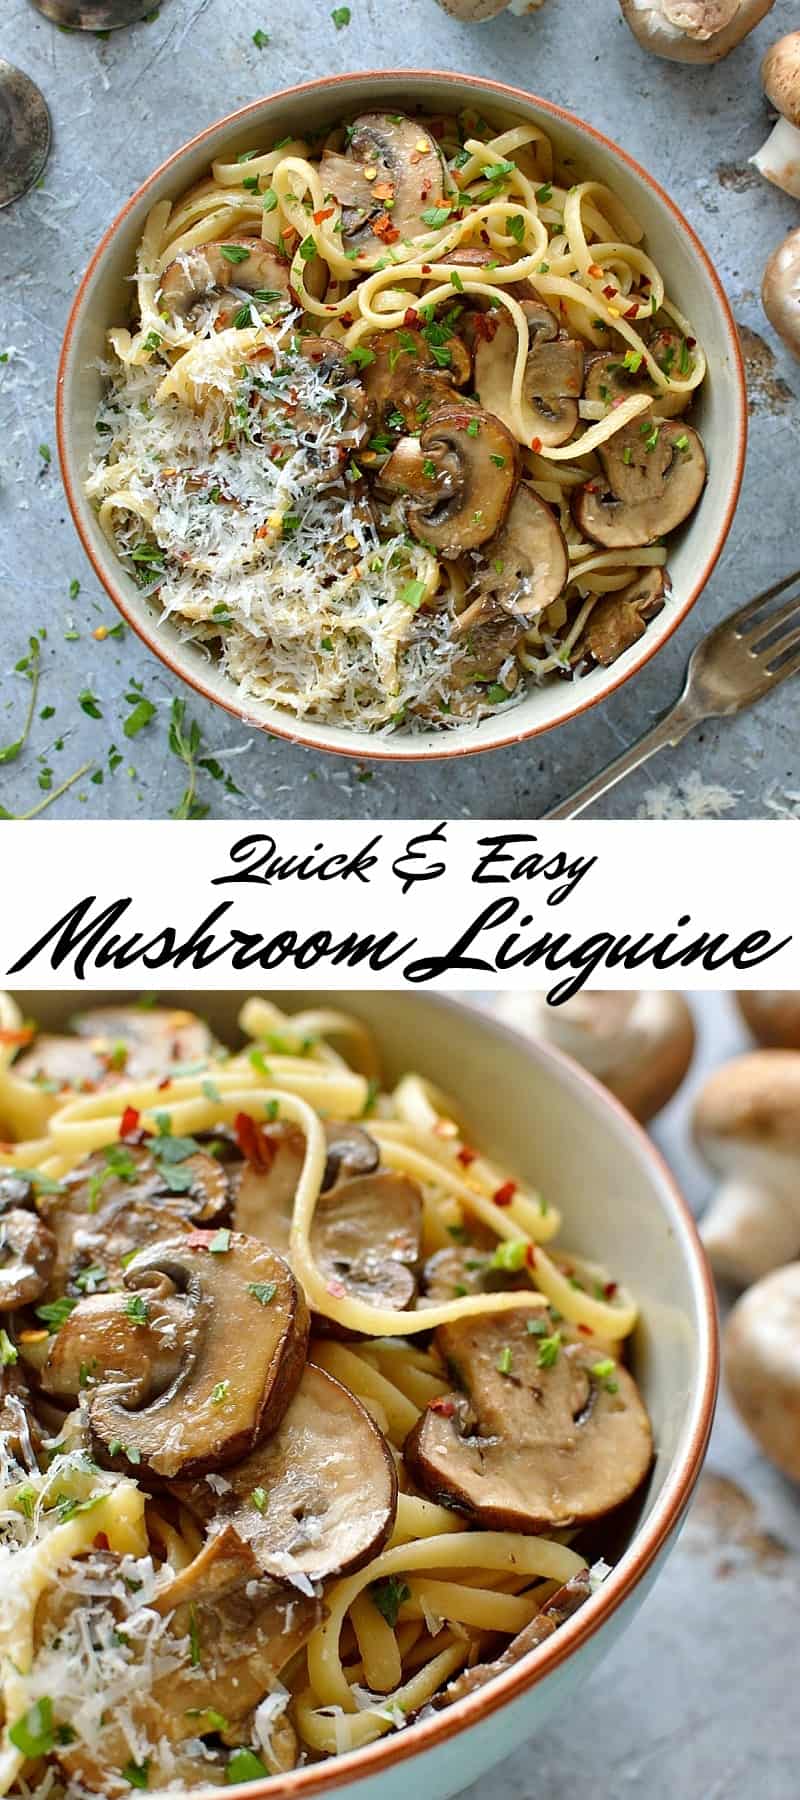 Easy mushroom linguine - ready in fifteen minutes this vegetarian mushroom linguine is quick, easy, healthy and delicious.